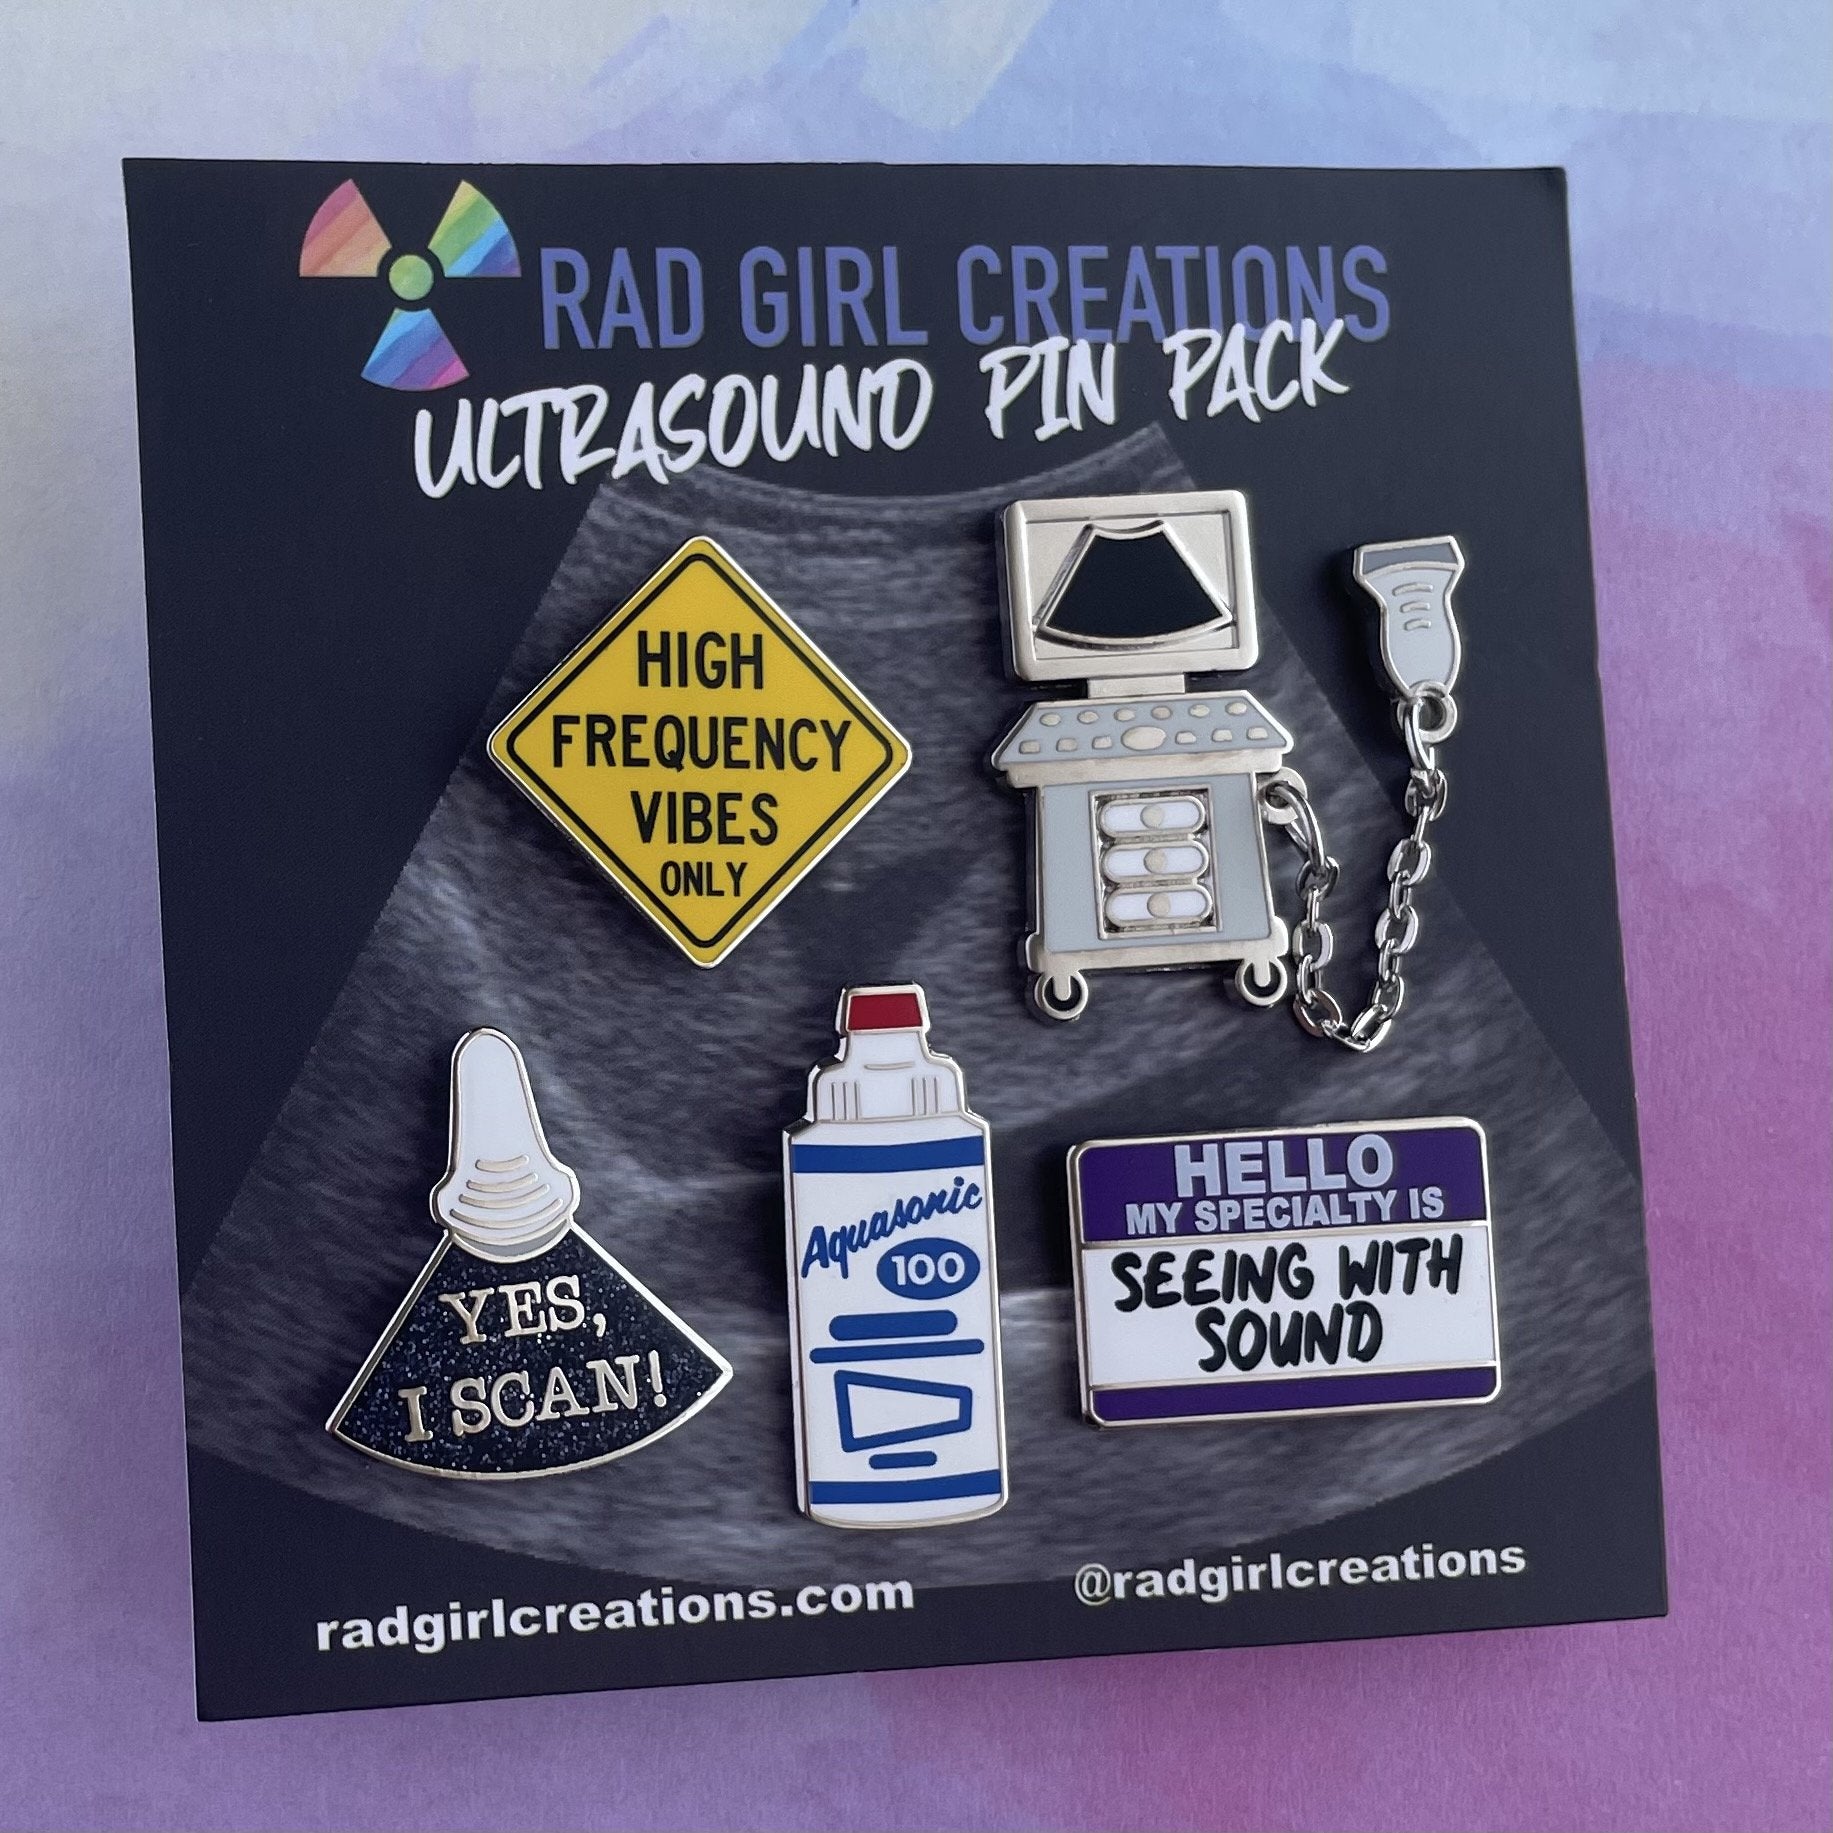 Ultrasound Pin Pack - Rad Girl Creations